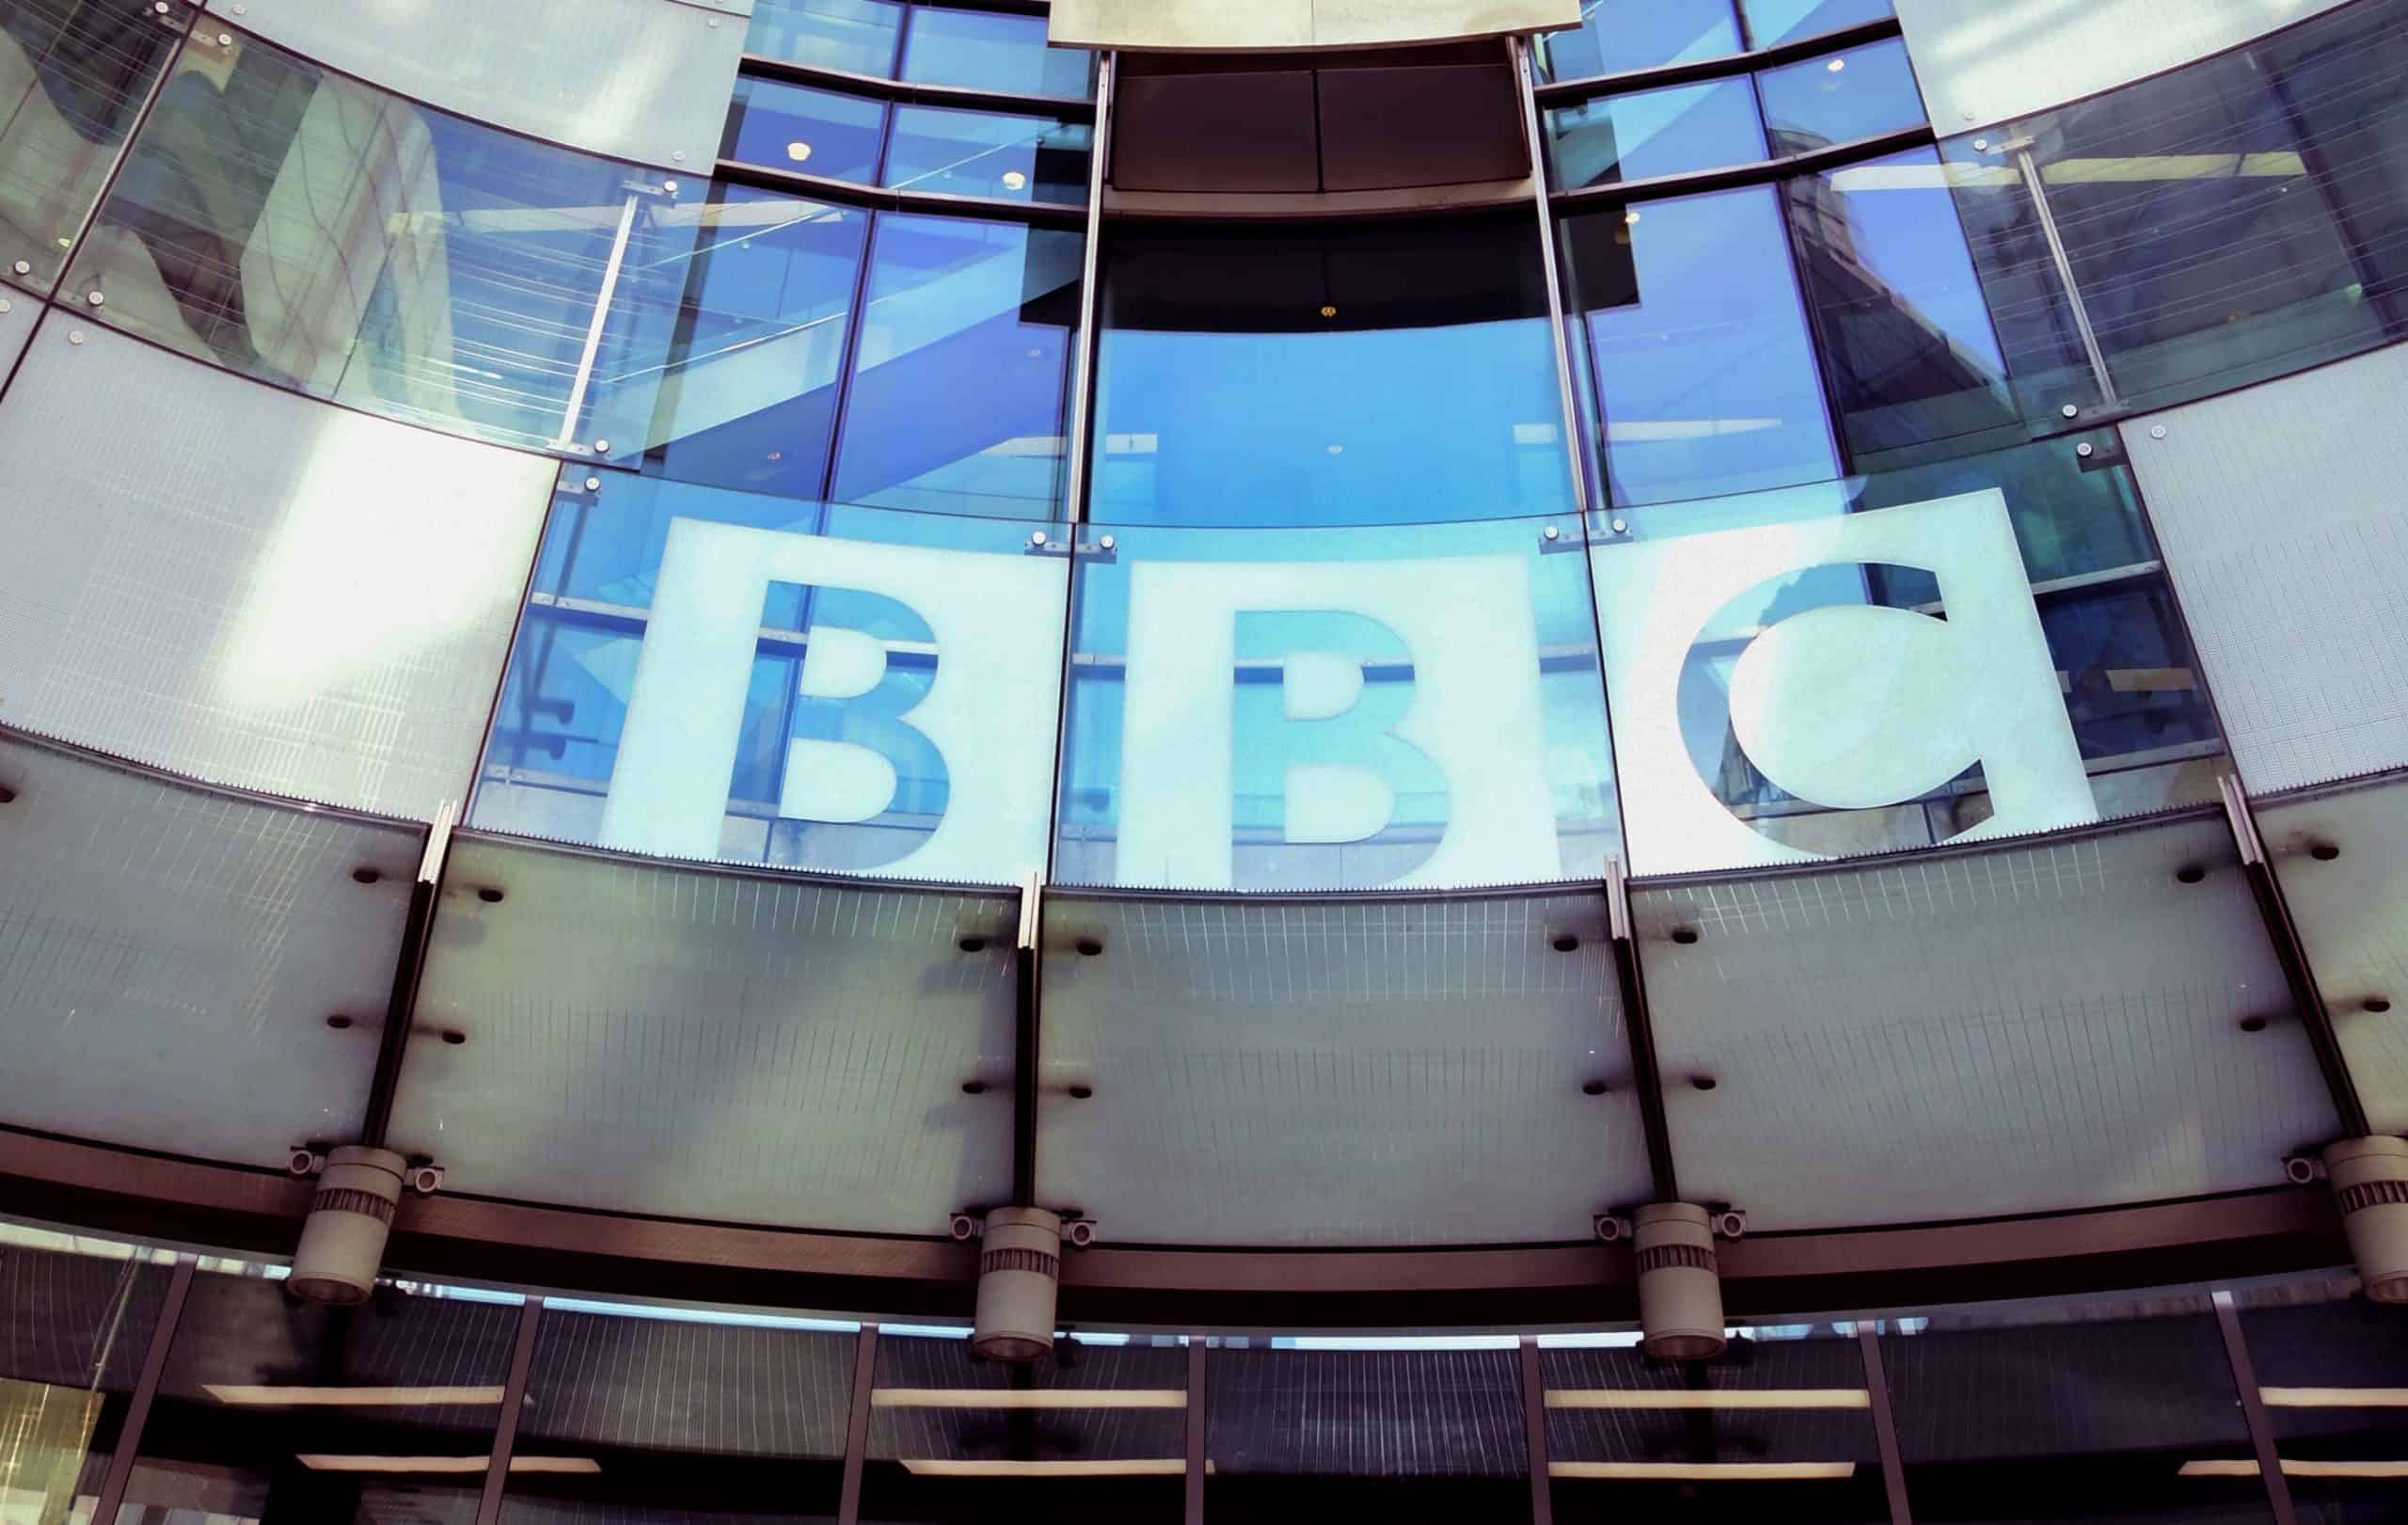 Former editorial director of anti-BBC broadcaster GB News joins BBC